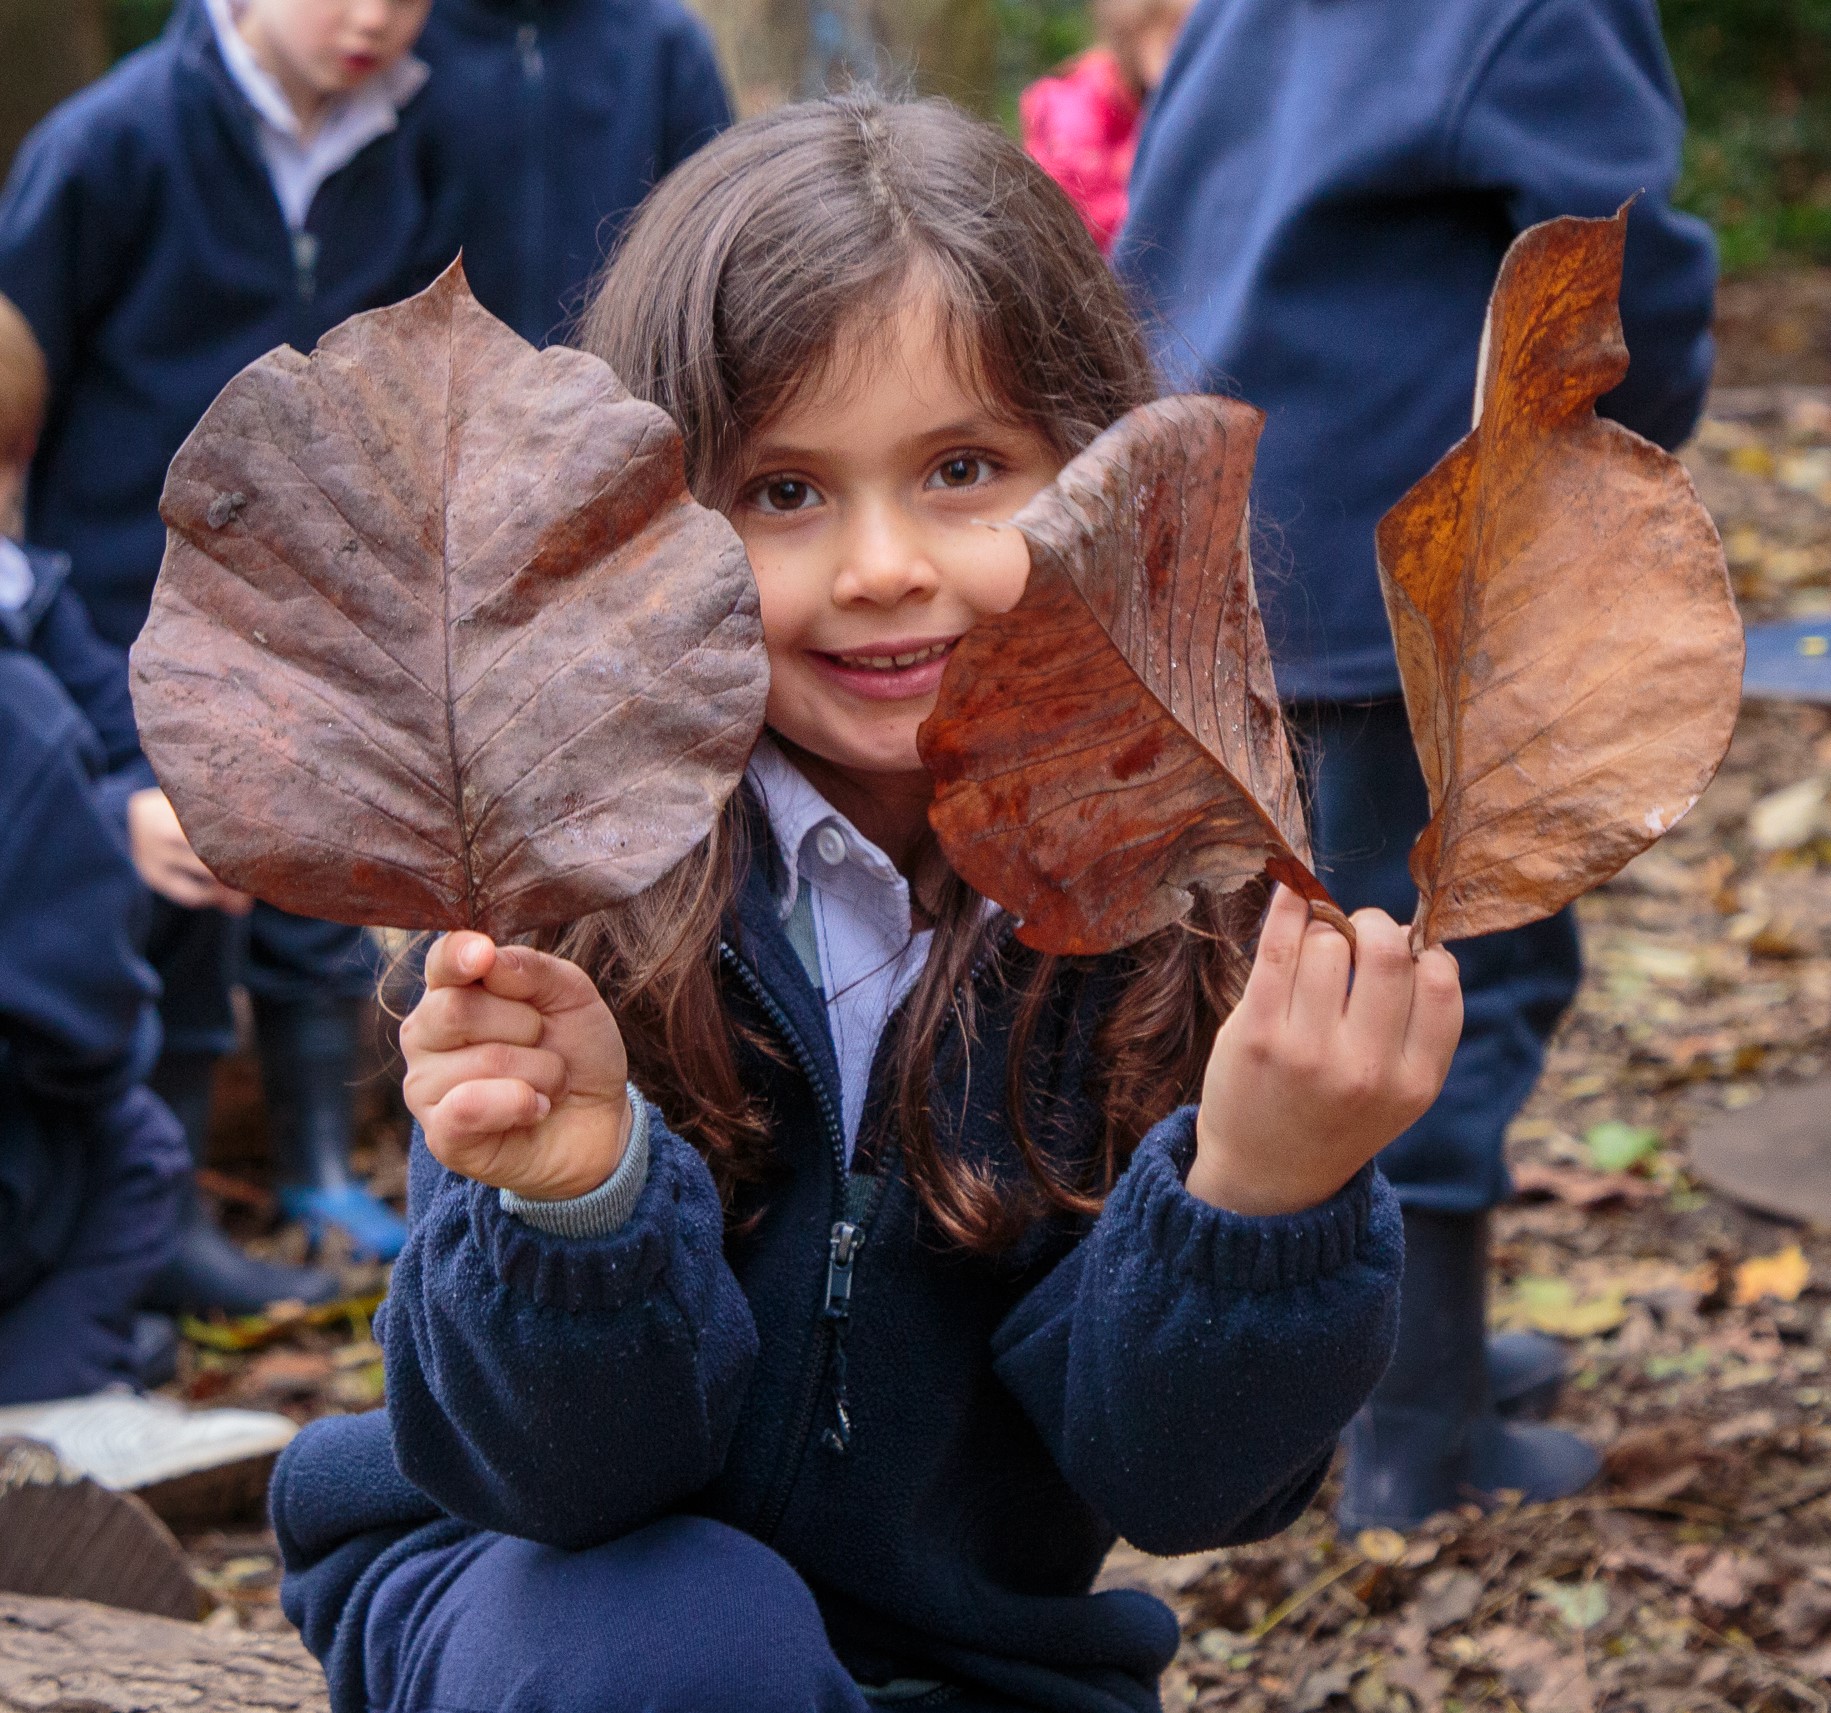 Child and big leaves